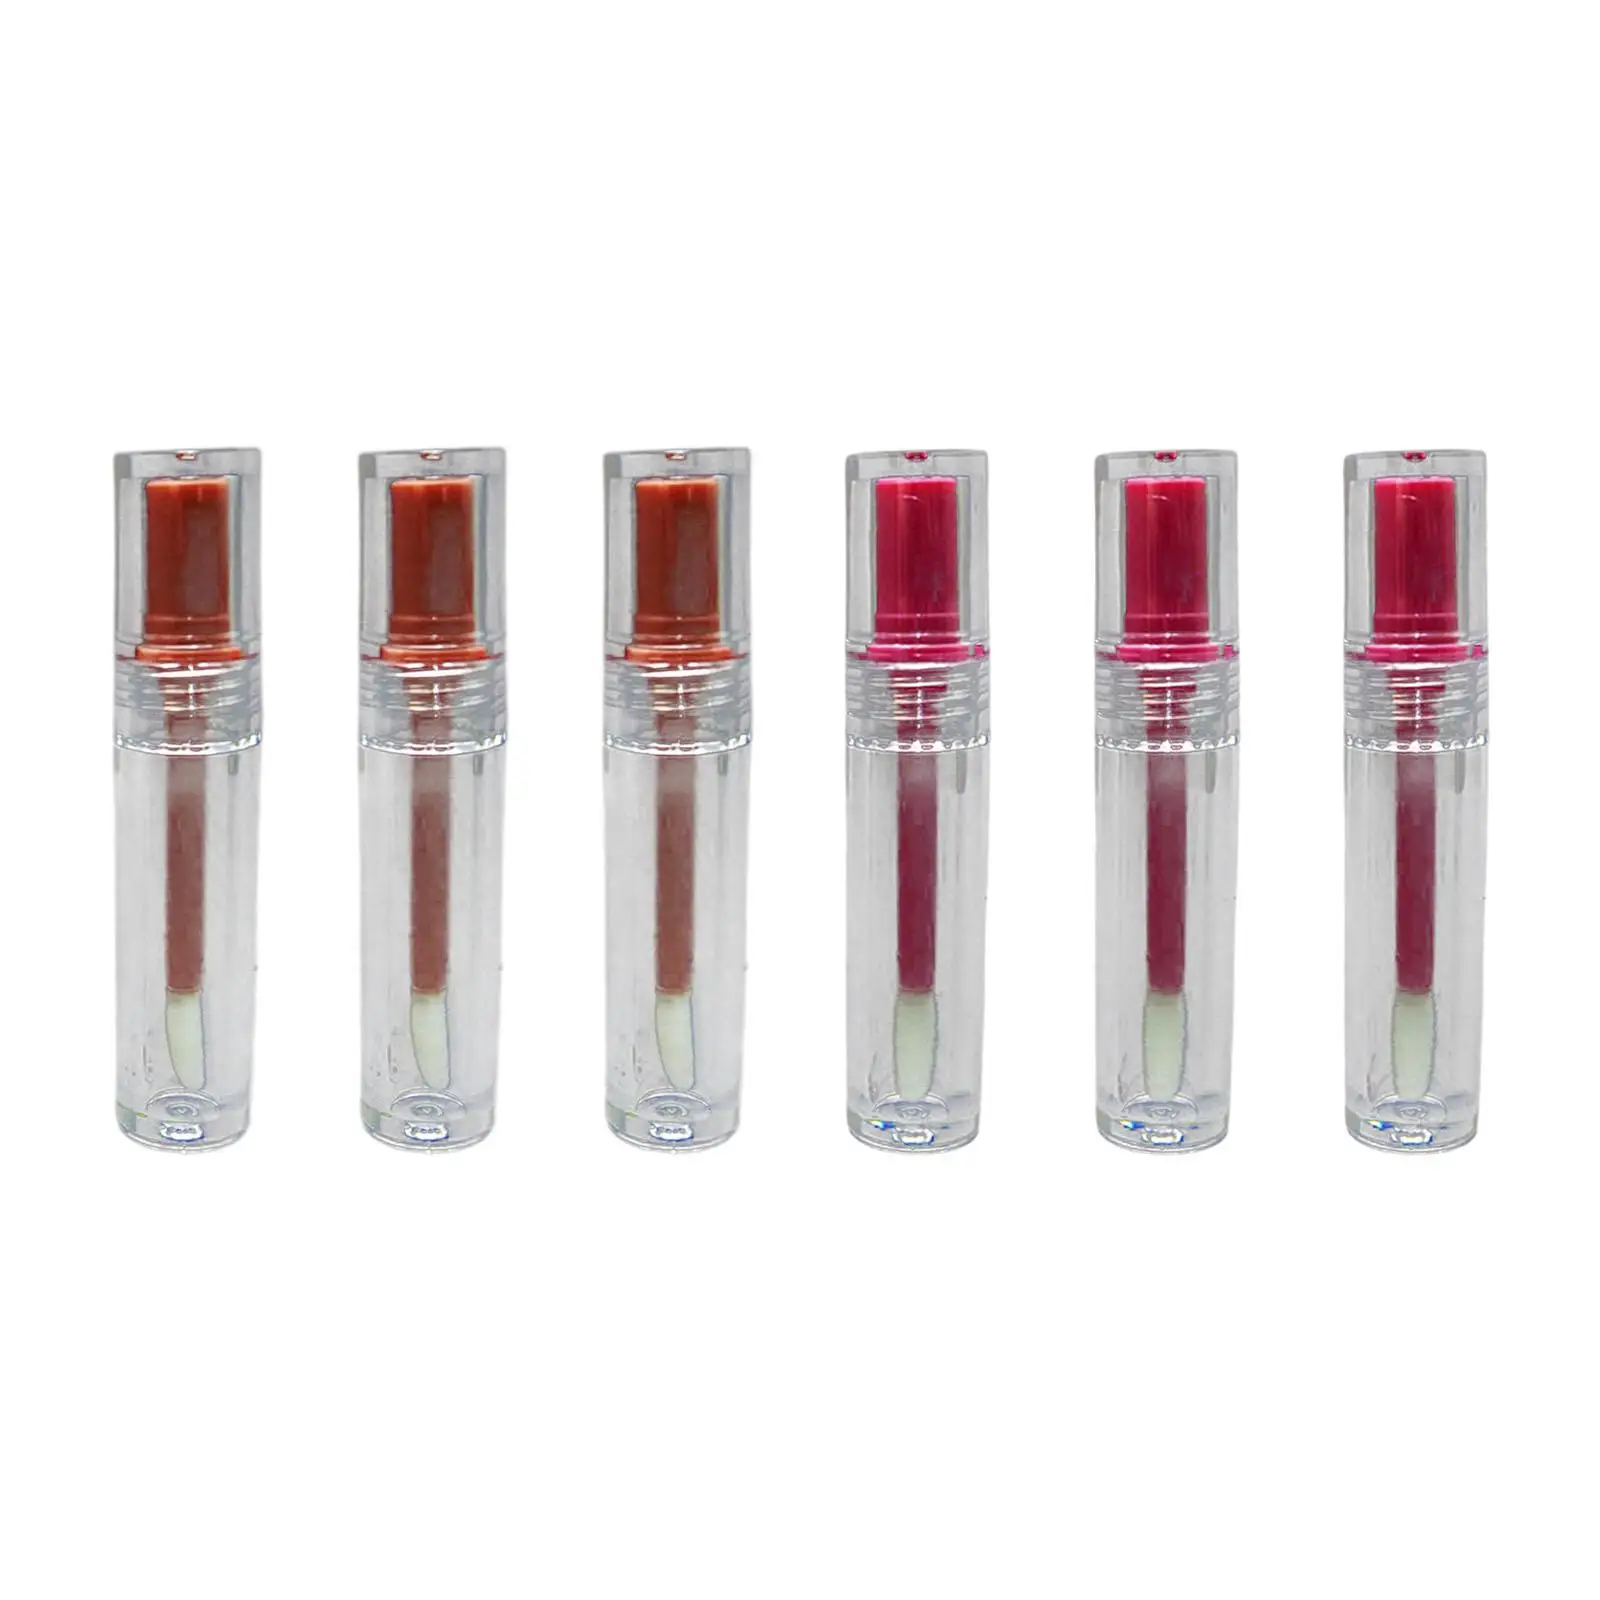 3 Pieces Lip Gloss Tubes 3ml Small with Rubber Insert Clear Lipgloss Tubes Lipstick Containers for DIY Makeup Travel Lip Samples